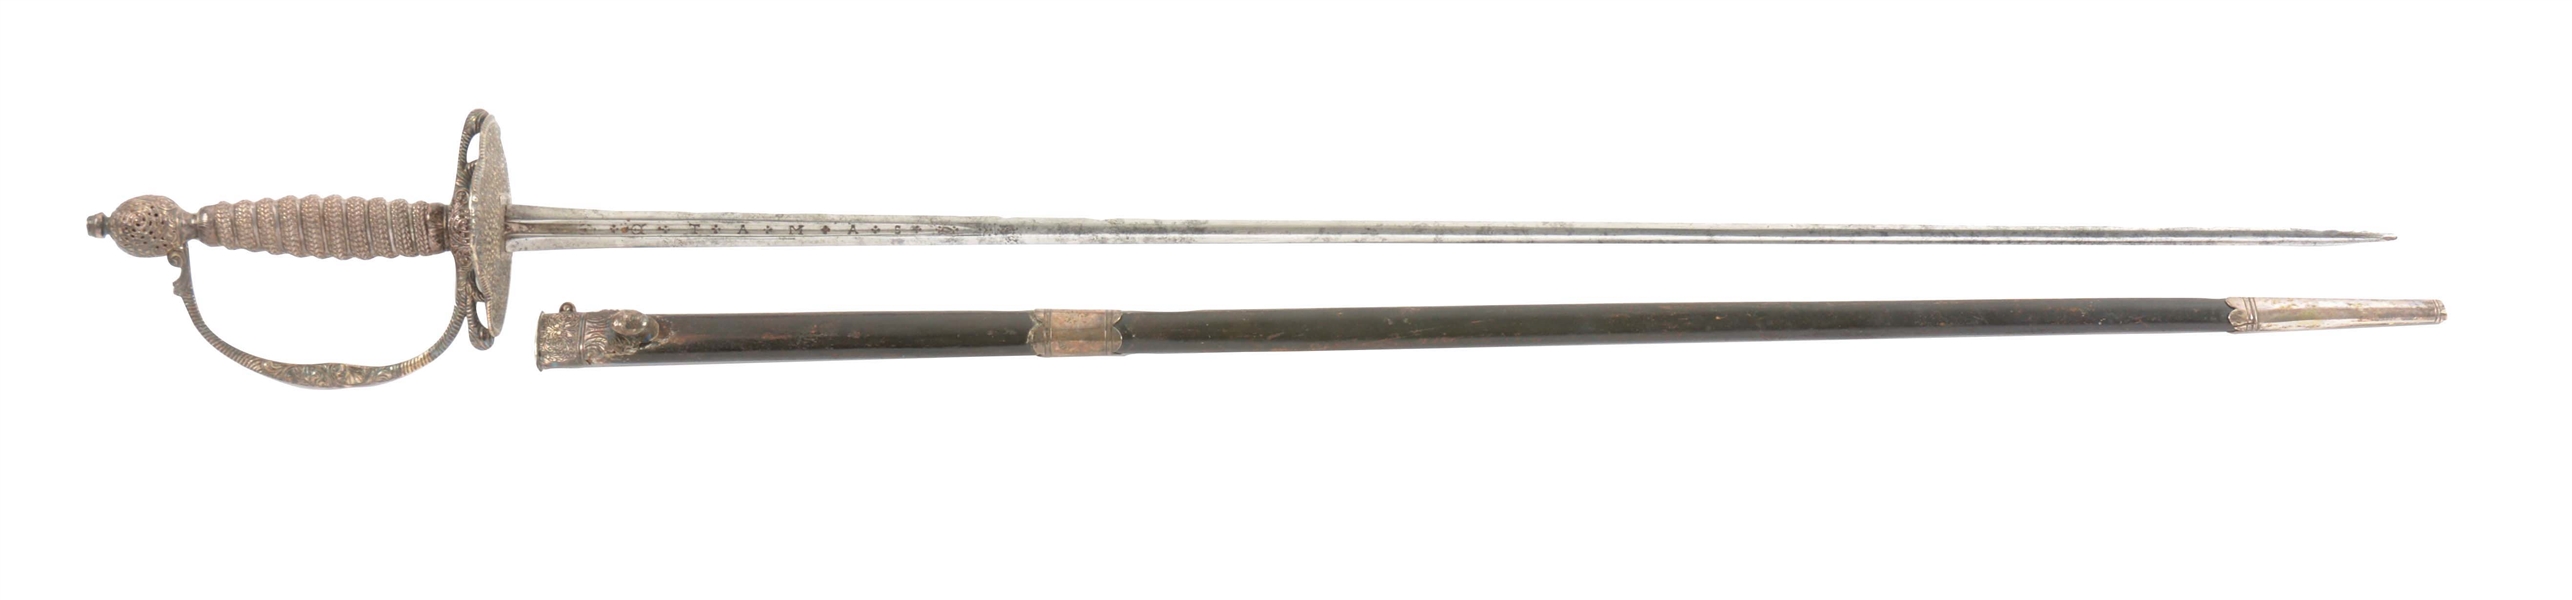 EXQUISITE ENGLISH PIERCED SILVER-HILTED SMALL SWORD AND SCABBARD BY BLAND, HALLMARKED FOR 1767.